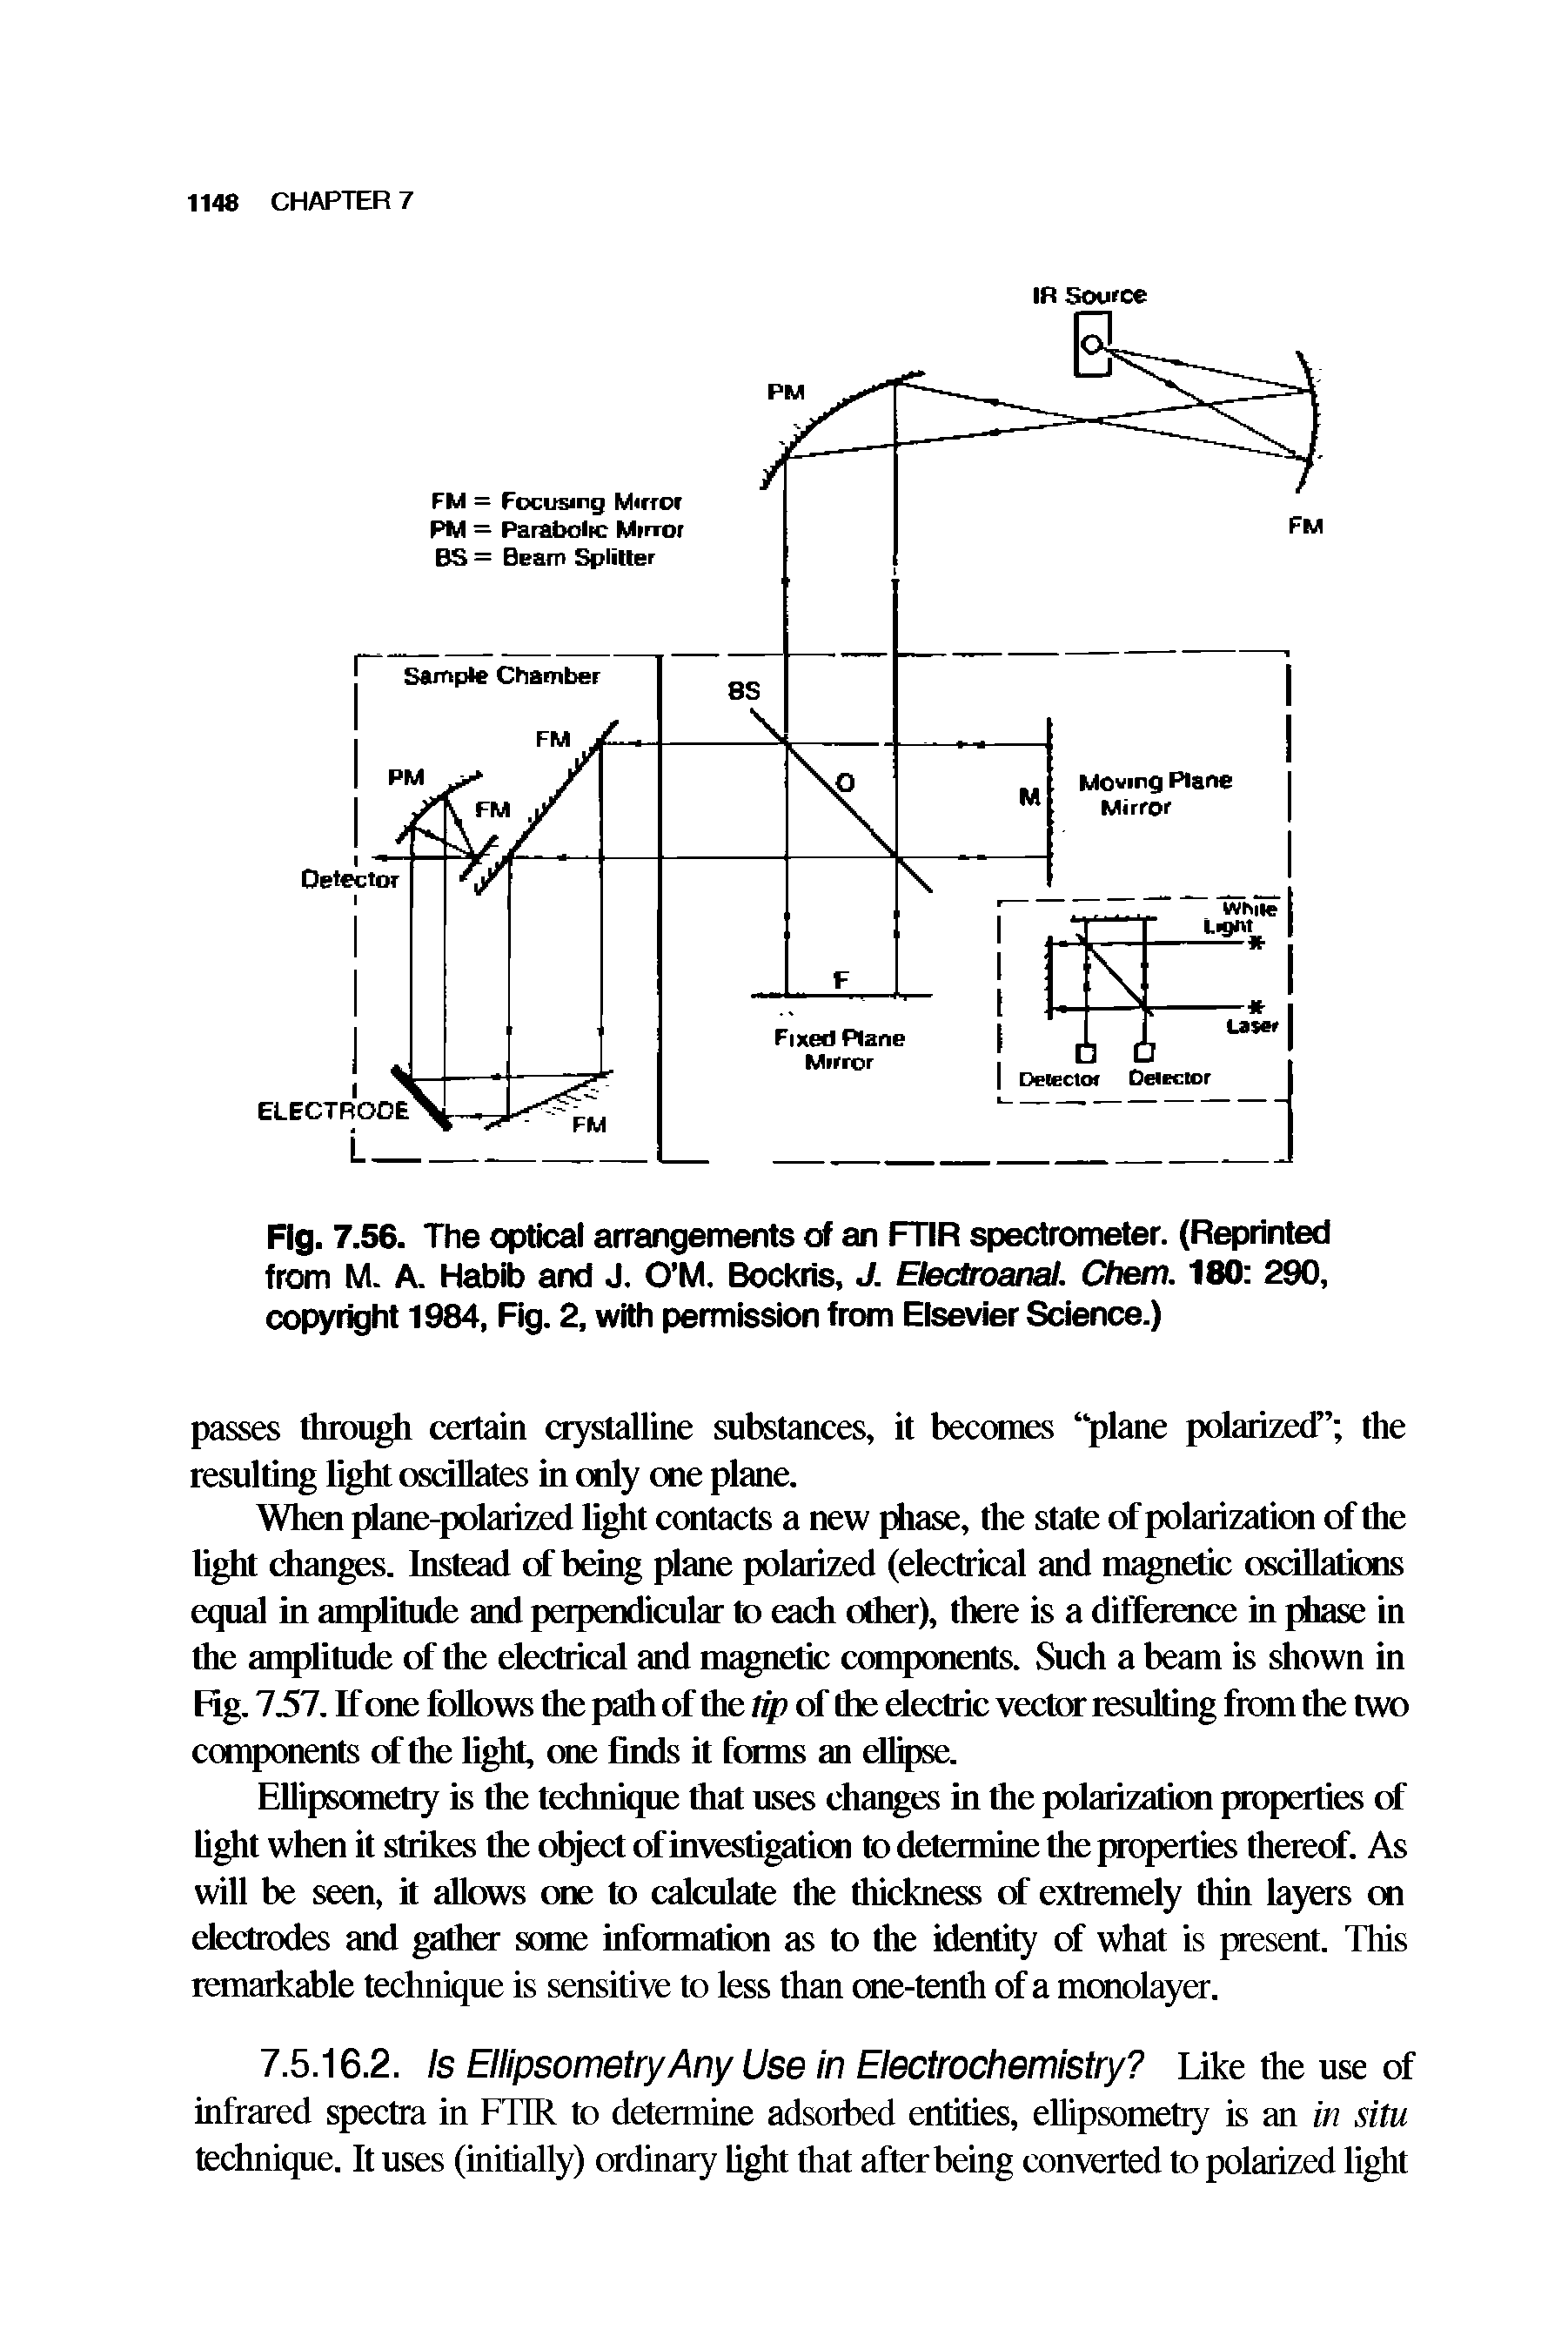 Fig. 7.56. The optical arrangements of an FTIR spectrometer. (Reprinted from M. A. Habib and J. O M. Bockris, J. Electroanal. Chem. 180 290, copyright 1984, Fig. 2, with permission from Elsevier Science.)...